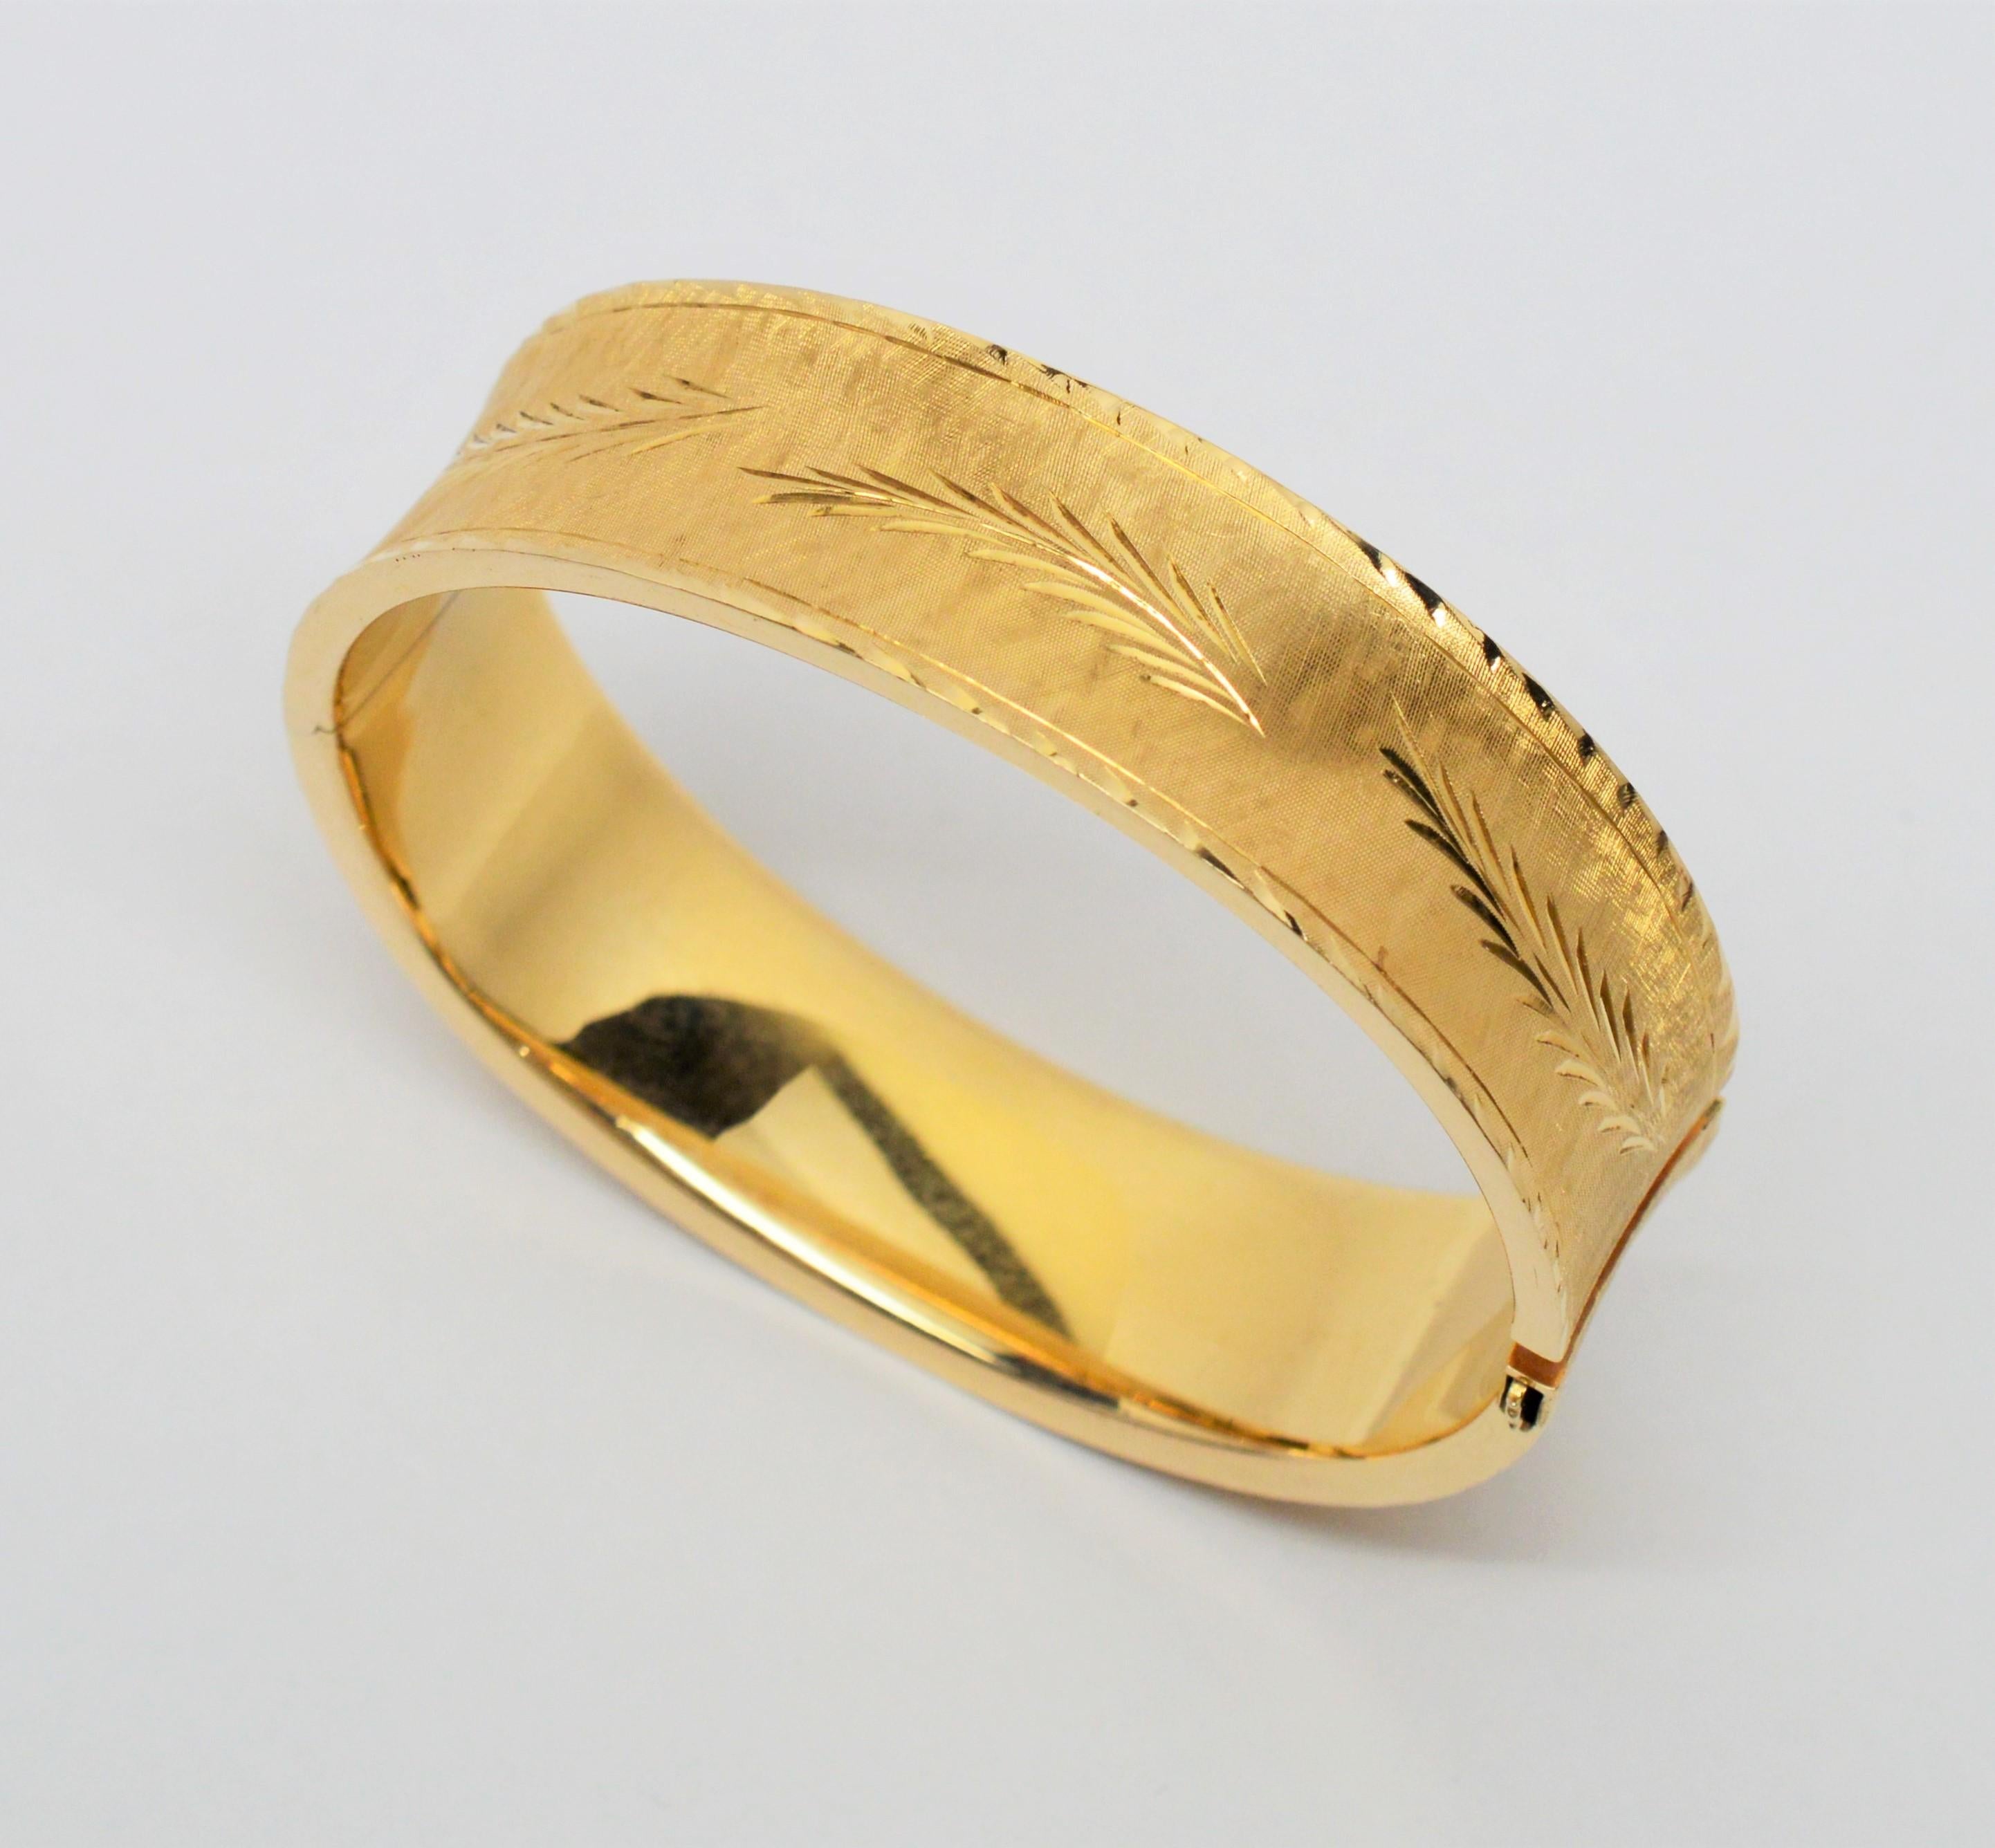 gold bangles for sale